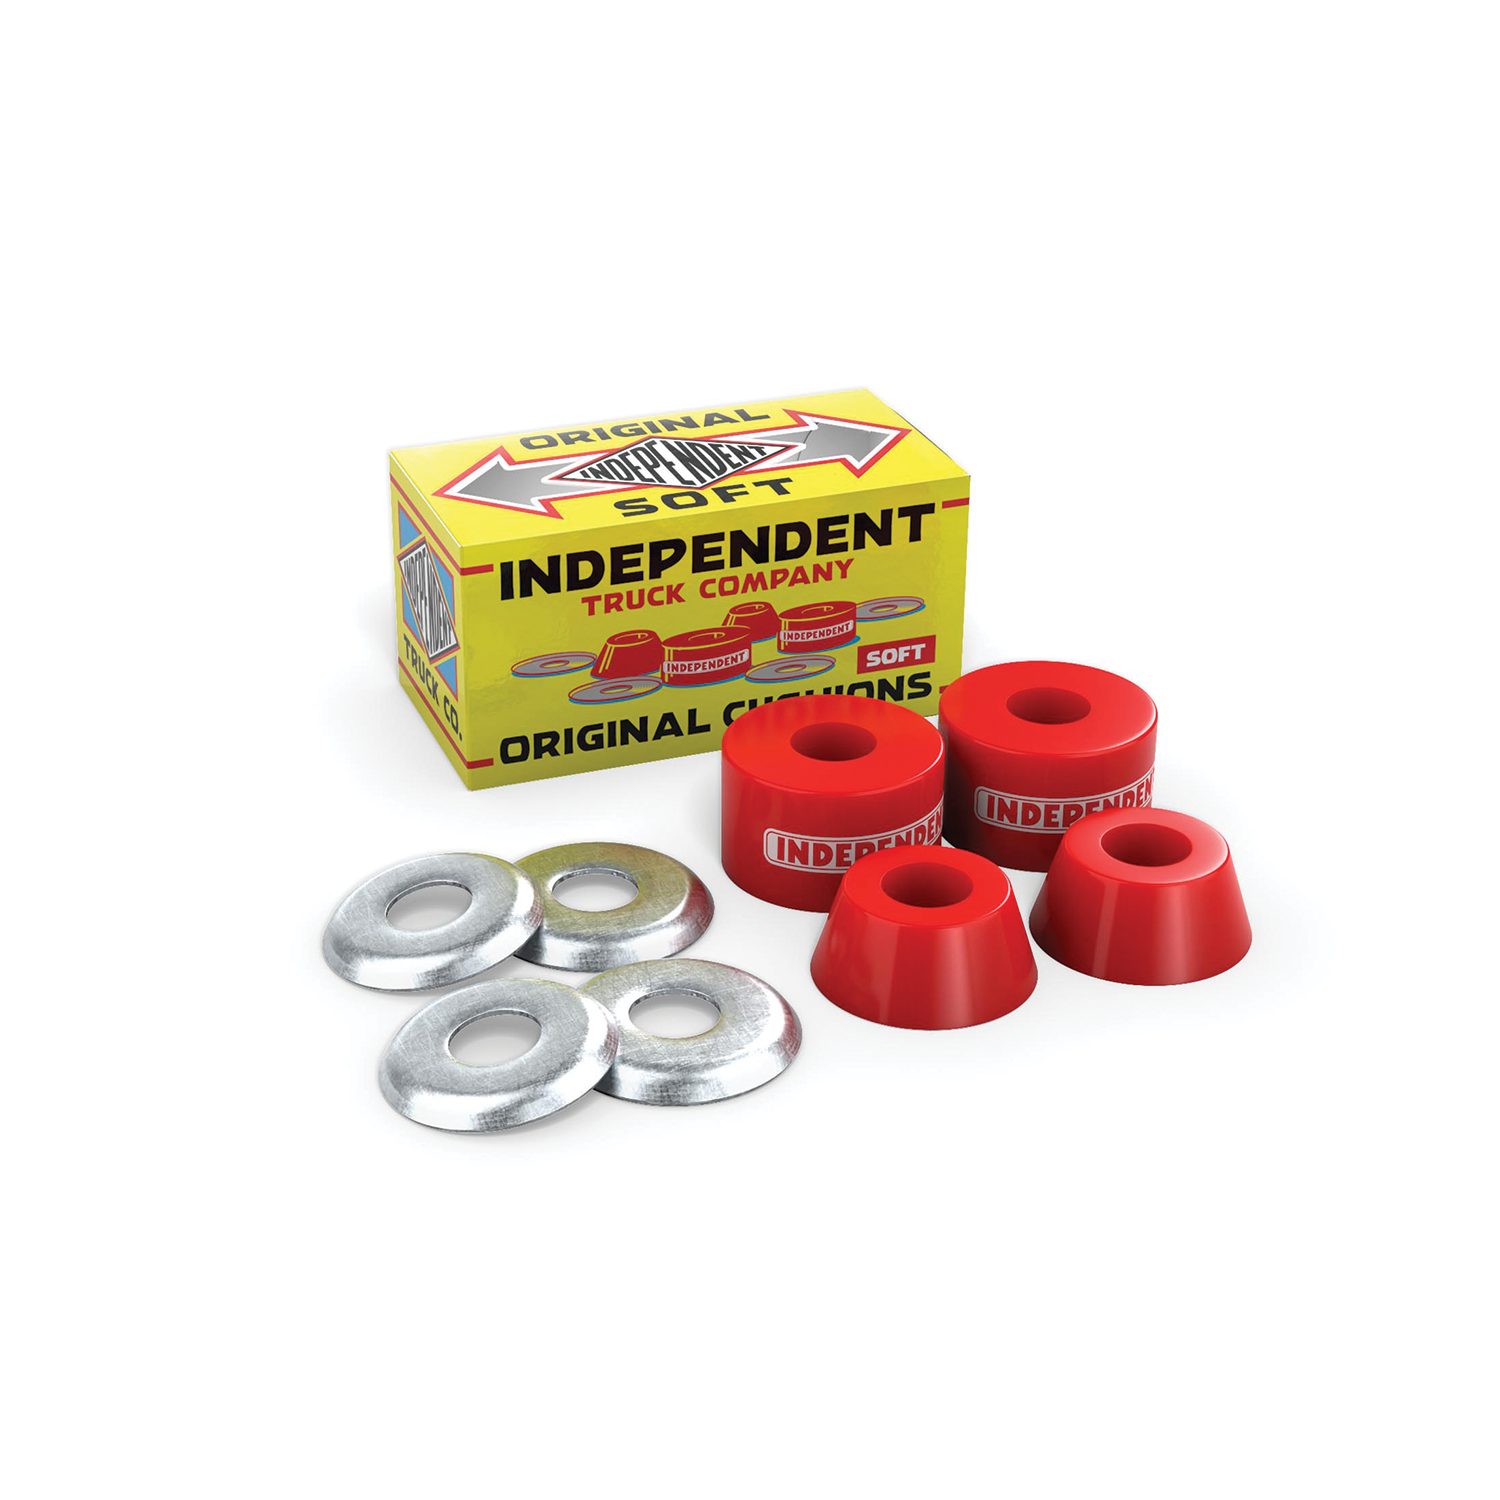 Independent - Soft 90a Genuine Parts - Red Cushions